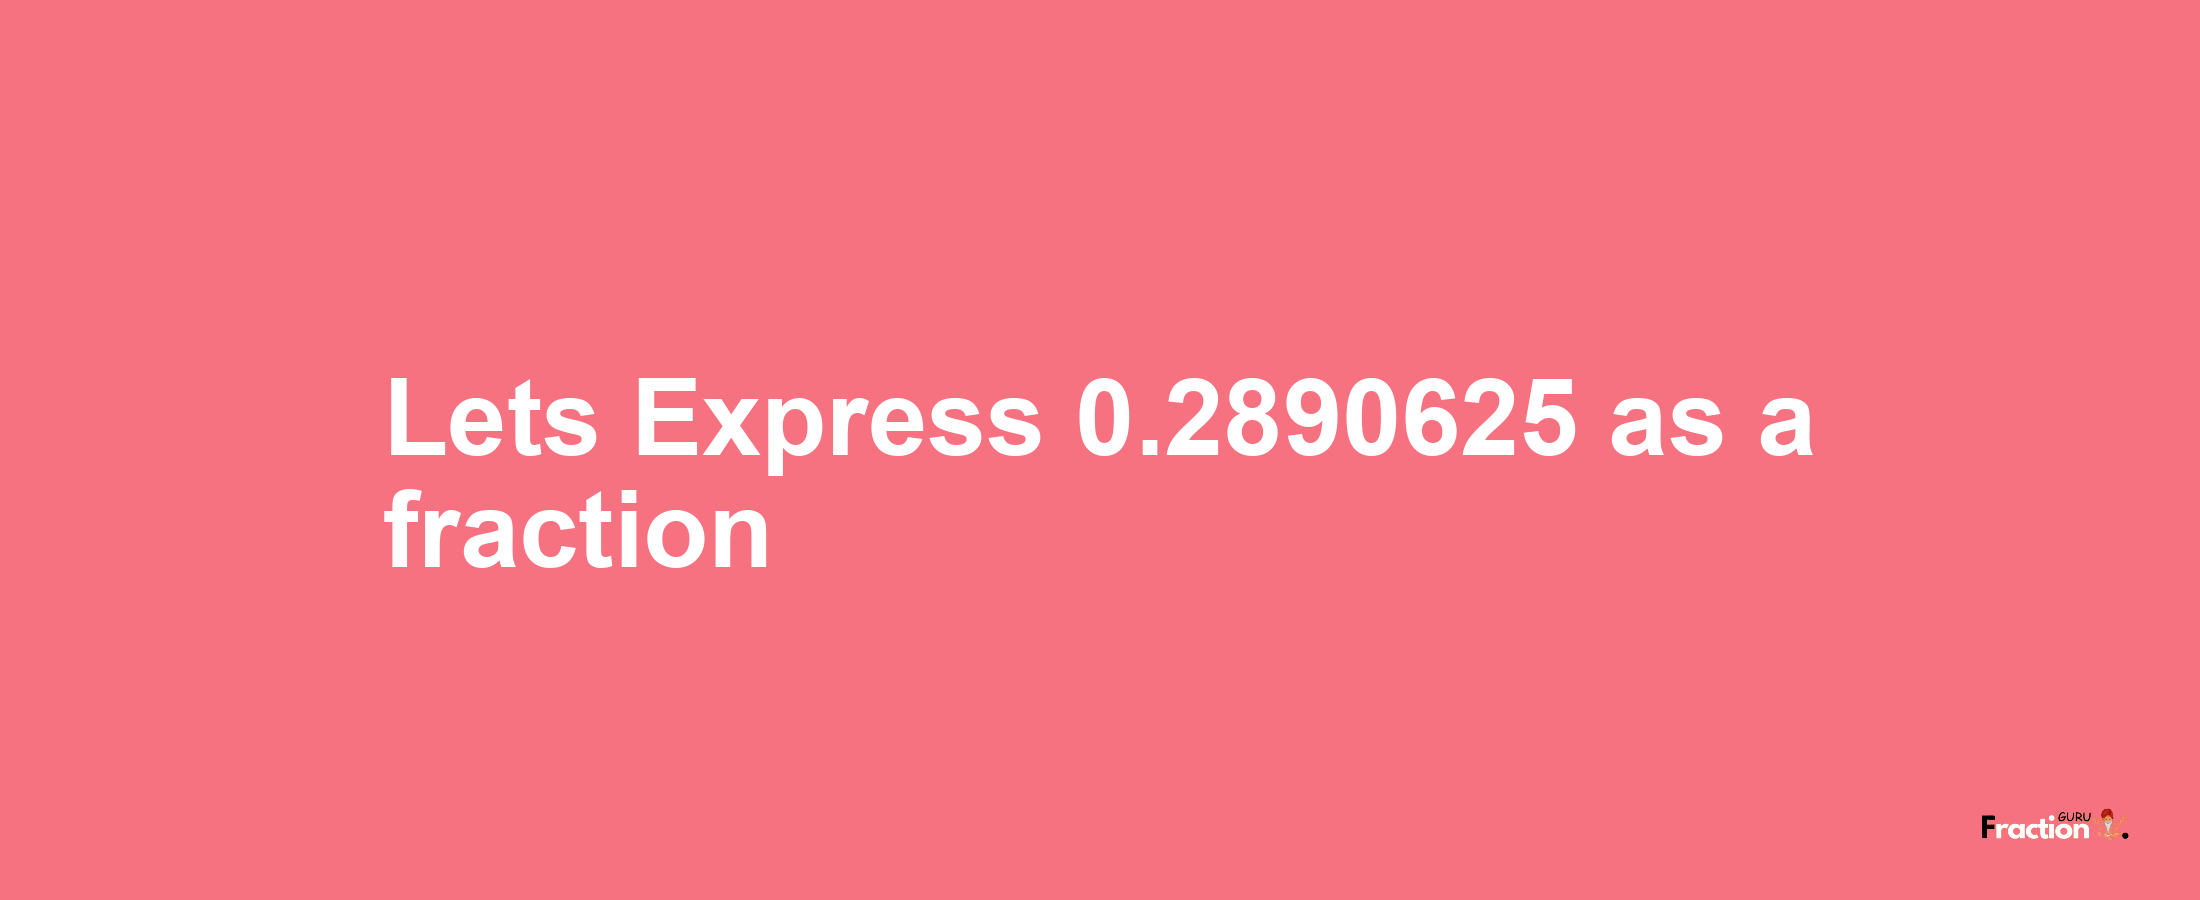 Lets Express 0.2890625 as afraction